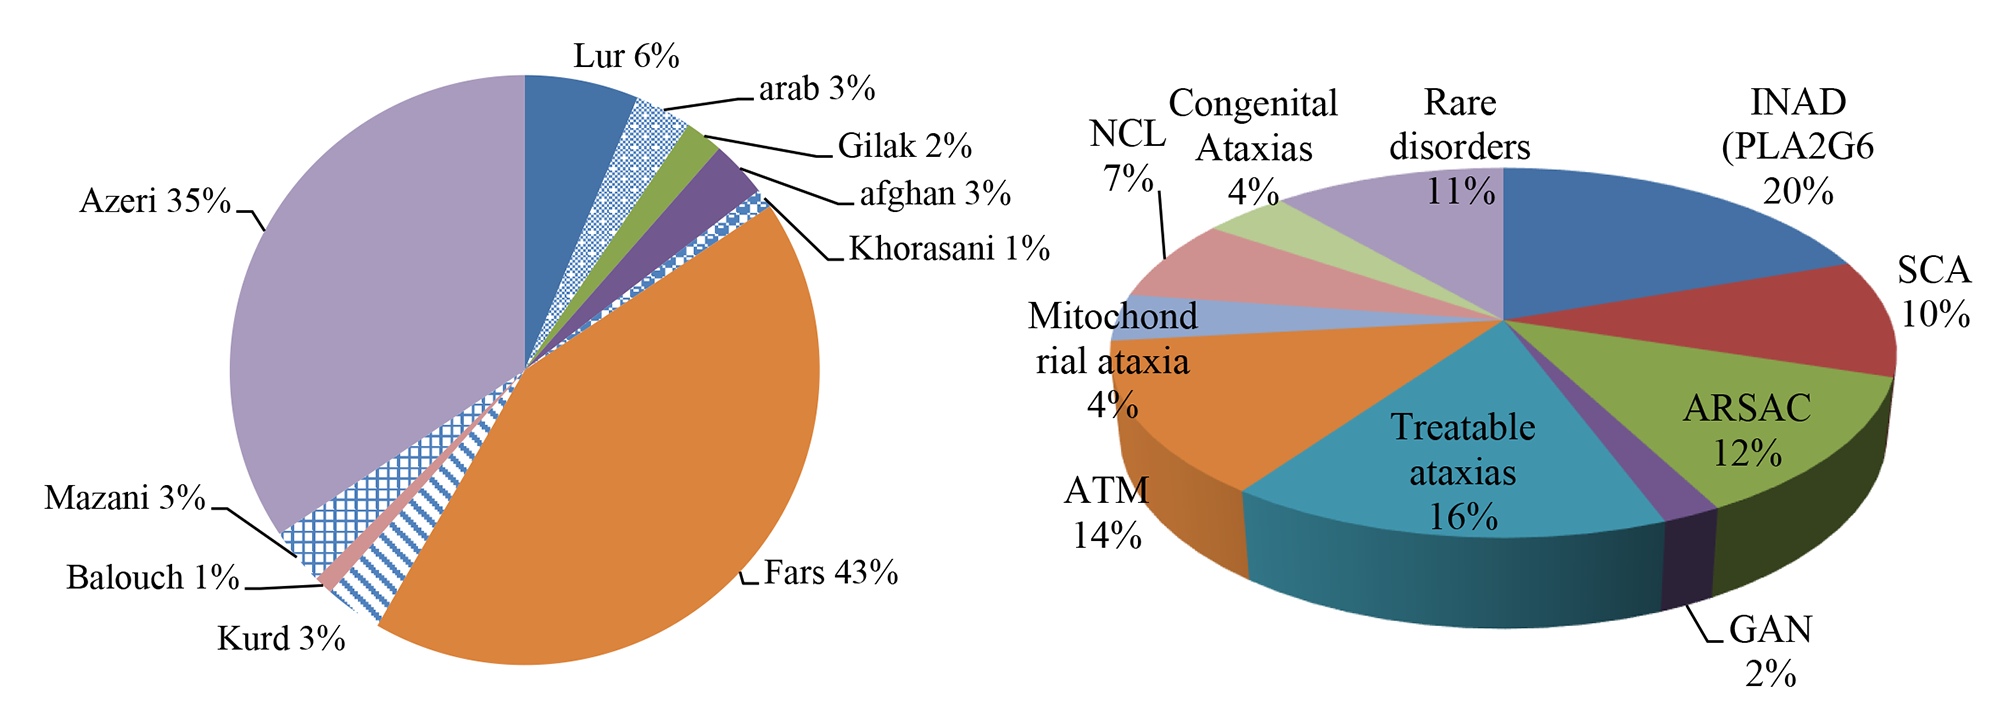 The genetic basis of early-onset hereditary ataxia in Iran: results of a national registry of a heterogeneous population